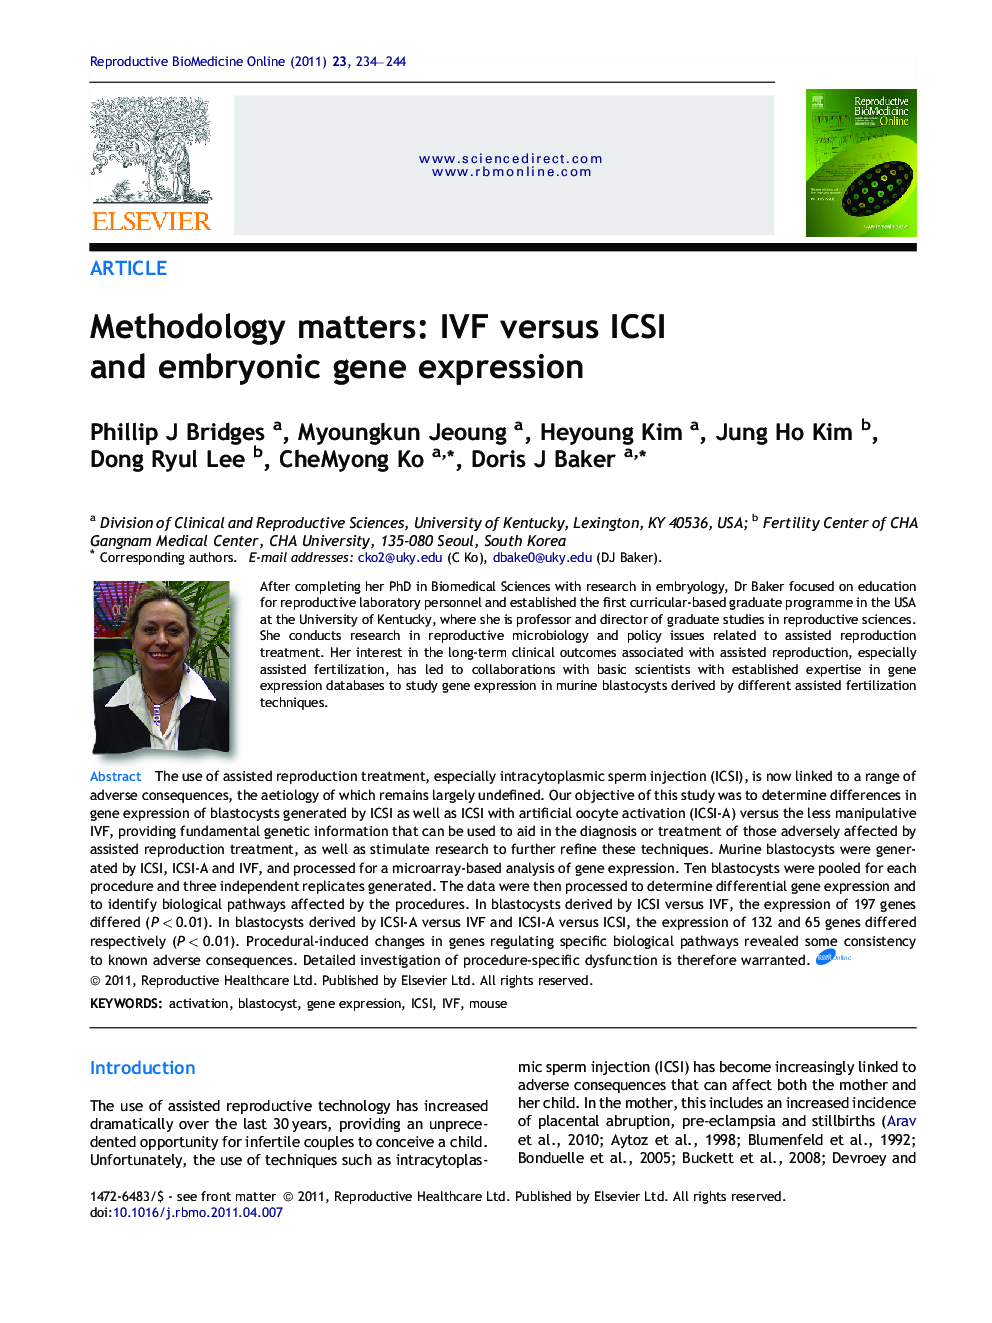 ArticleMethodology matters: IVF versus ICSI and embryonic gene expression